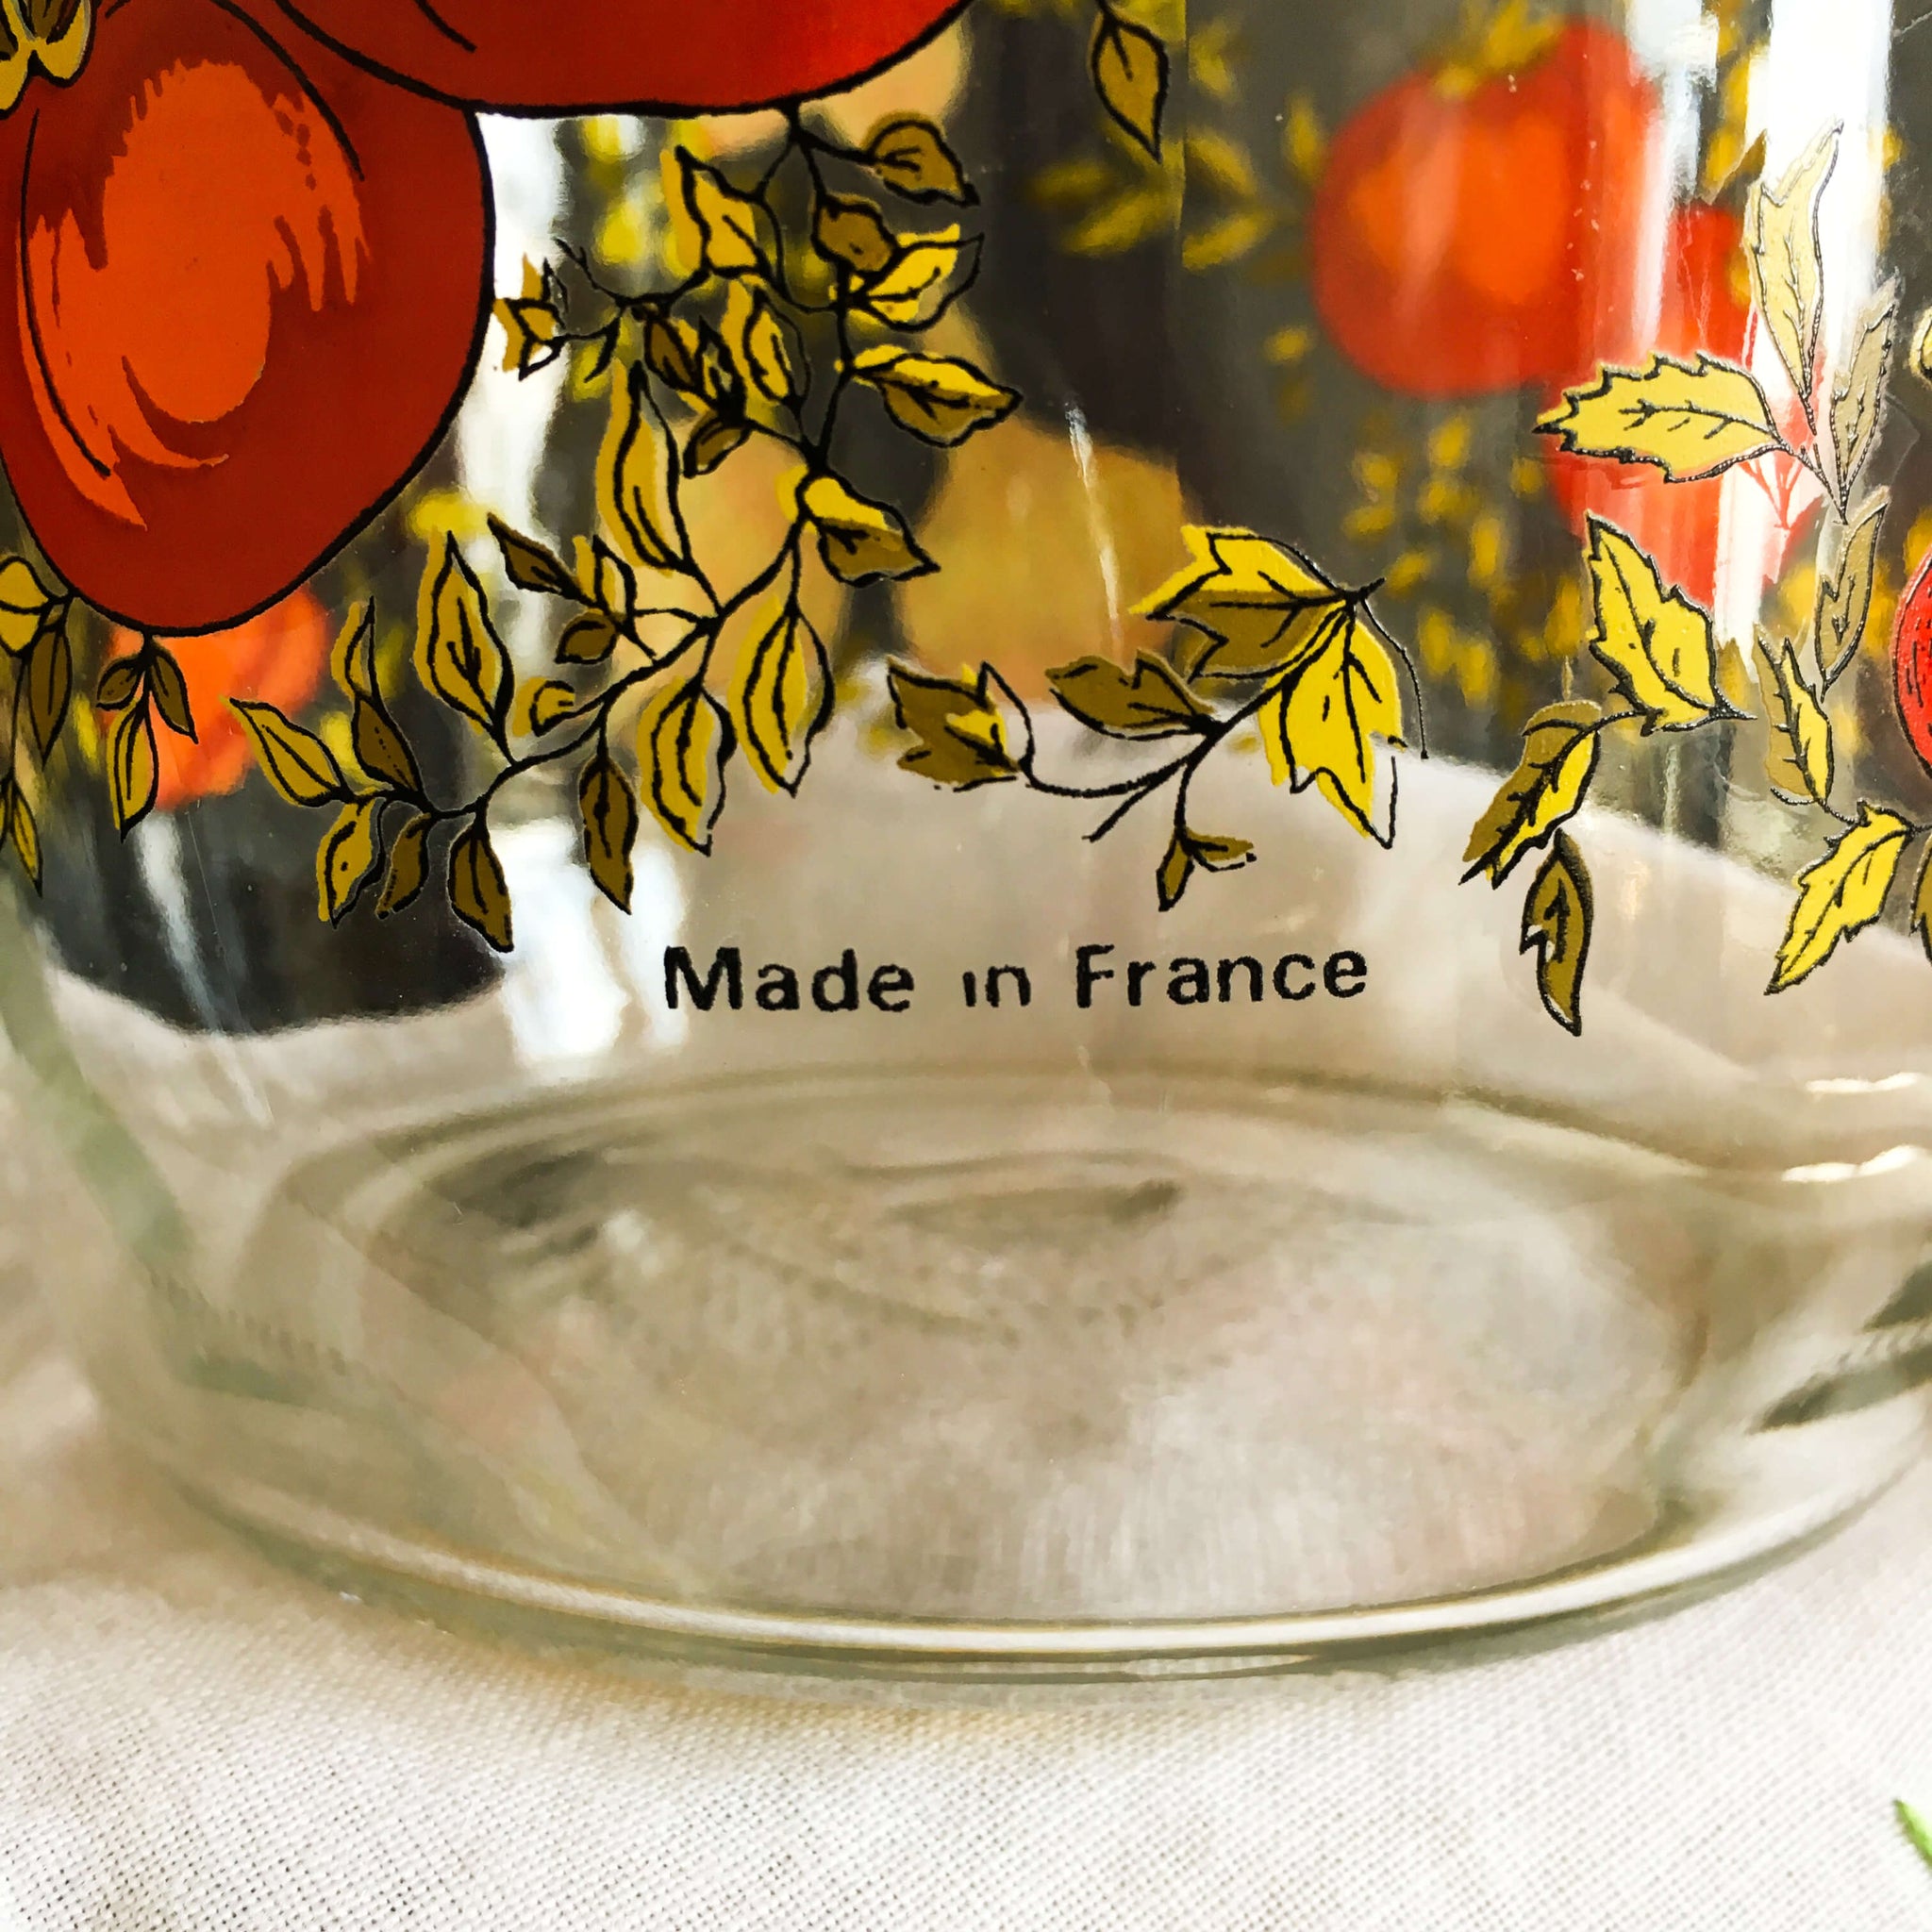 Vintage Spice of Life Canning Jar - Made in France by ARC - 1 Litre Size Storage Container